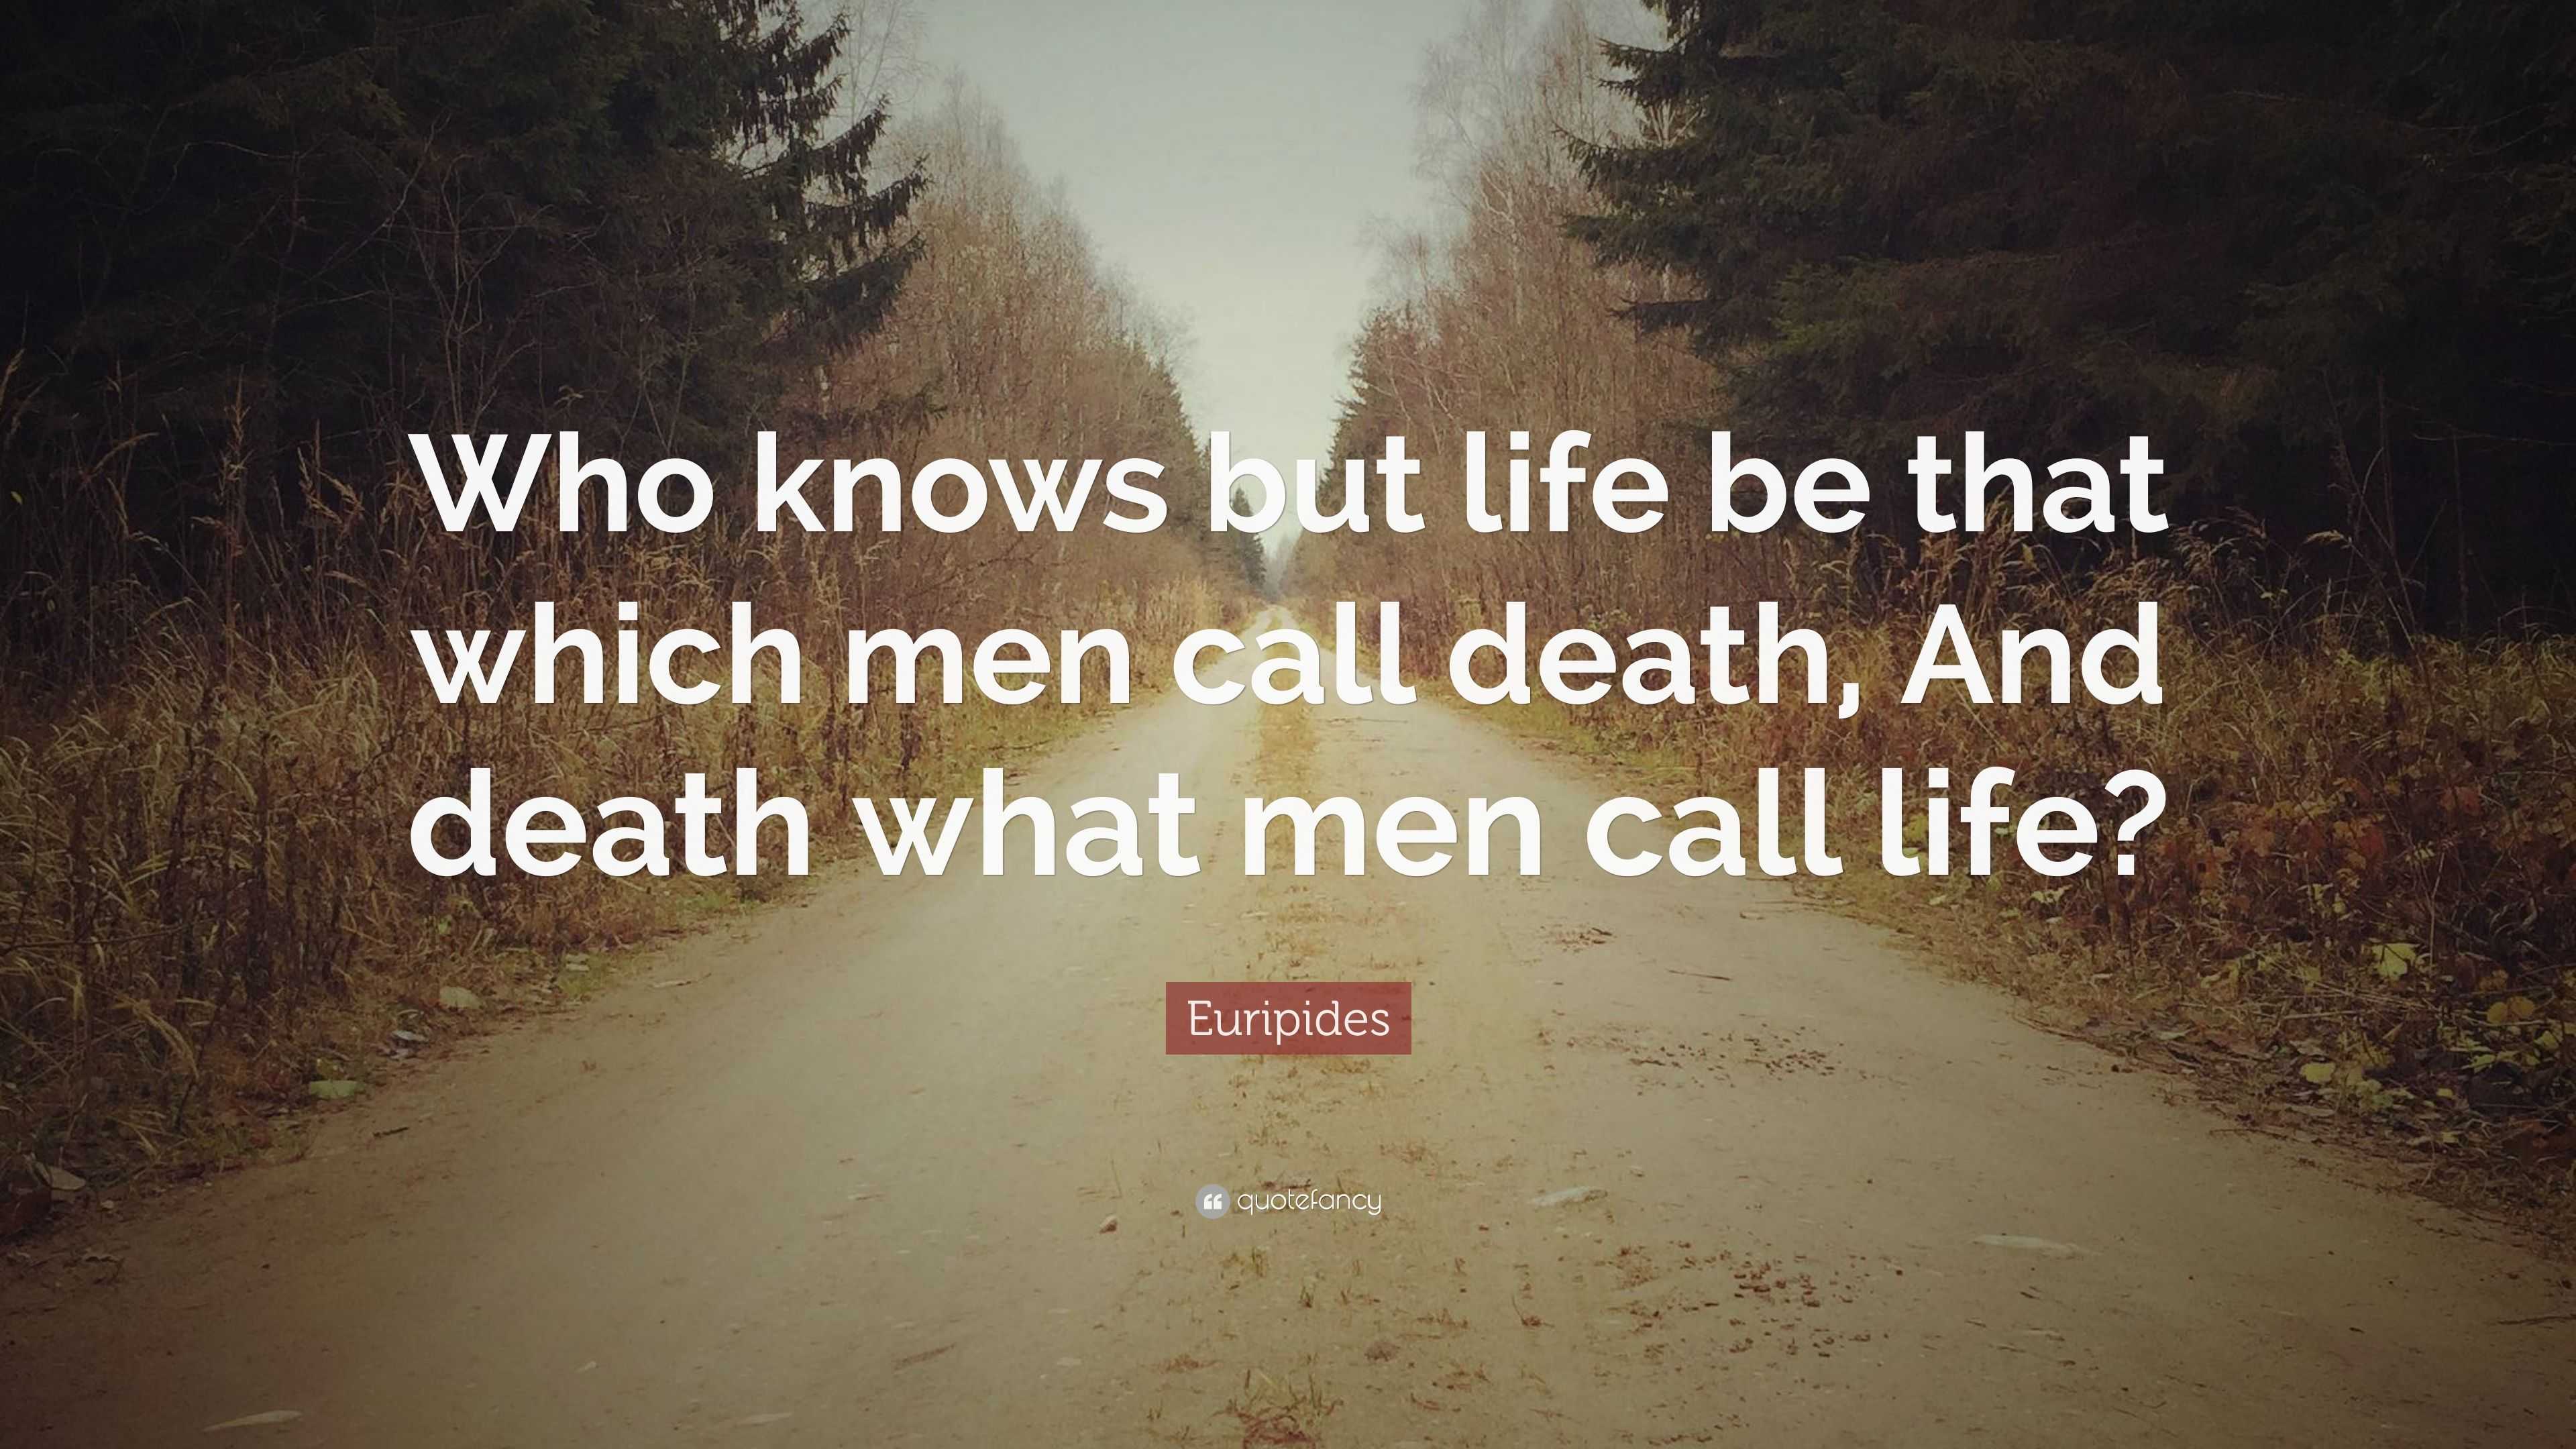 Euripides Quote “Who knows but life be that which men